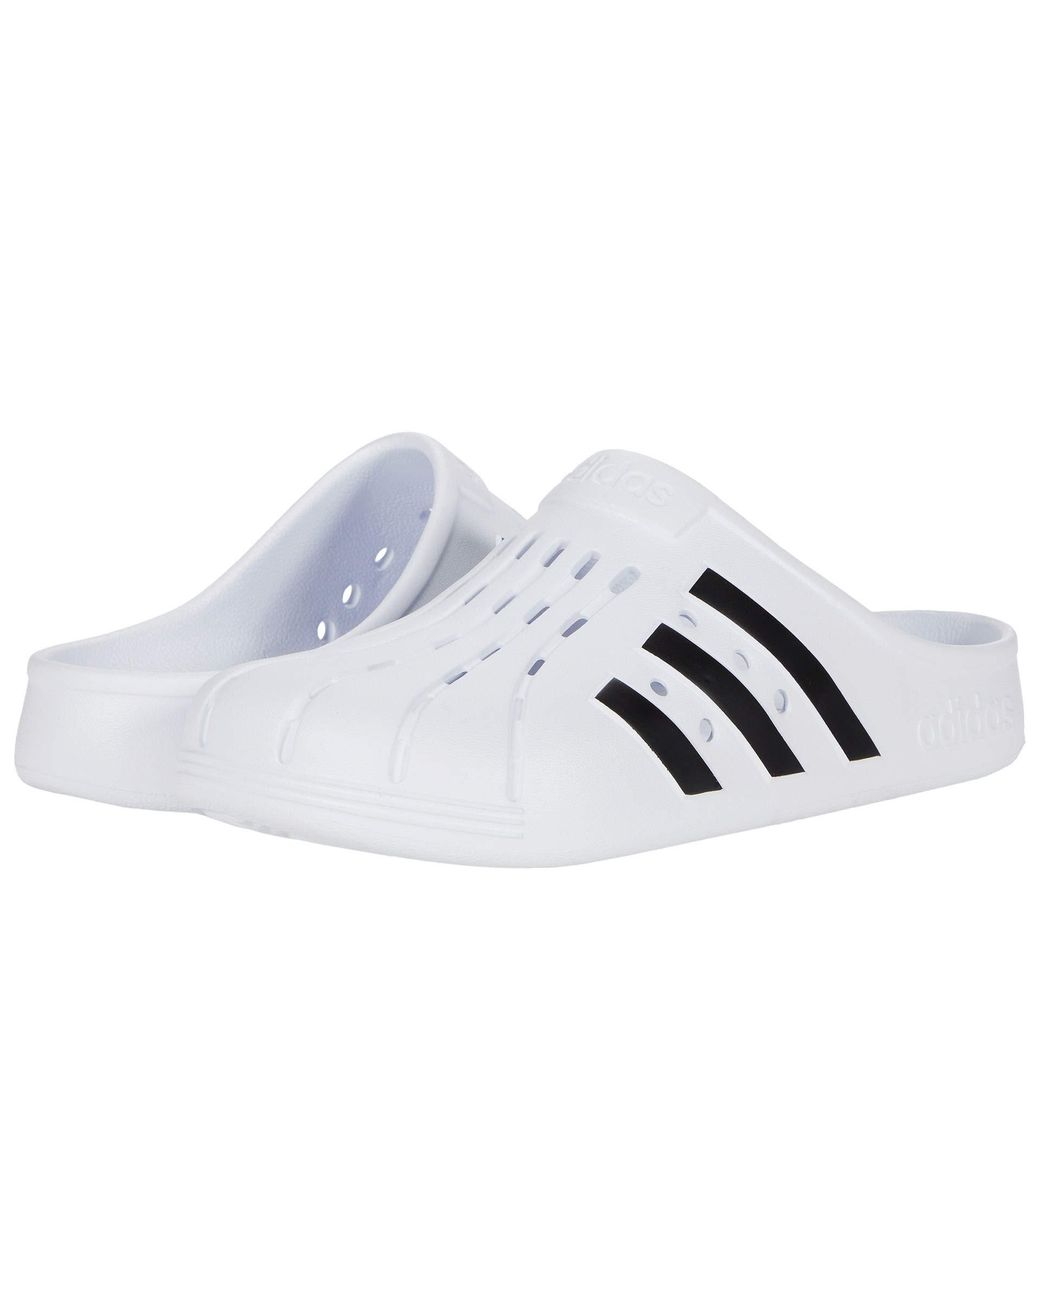 adidas Synthetic Adilette Clog in White - Lyst